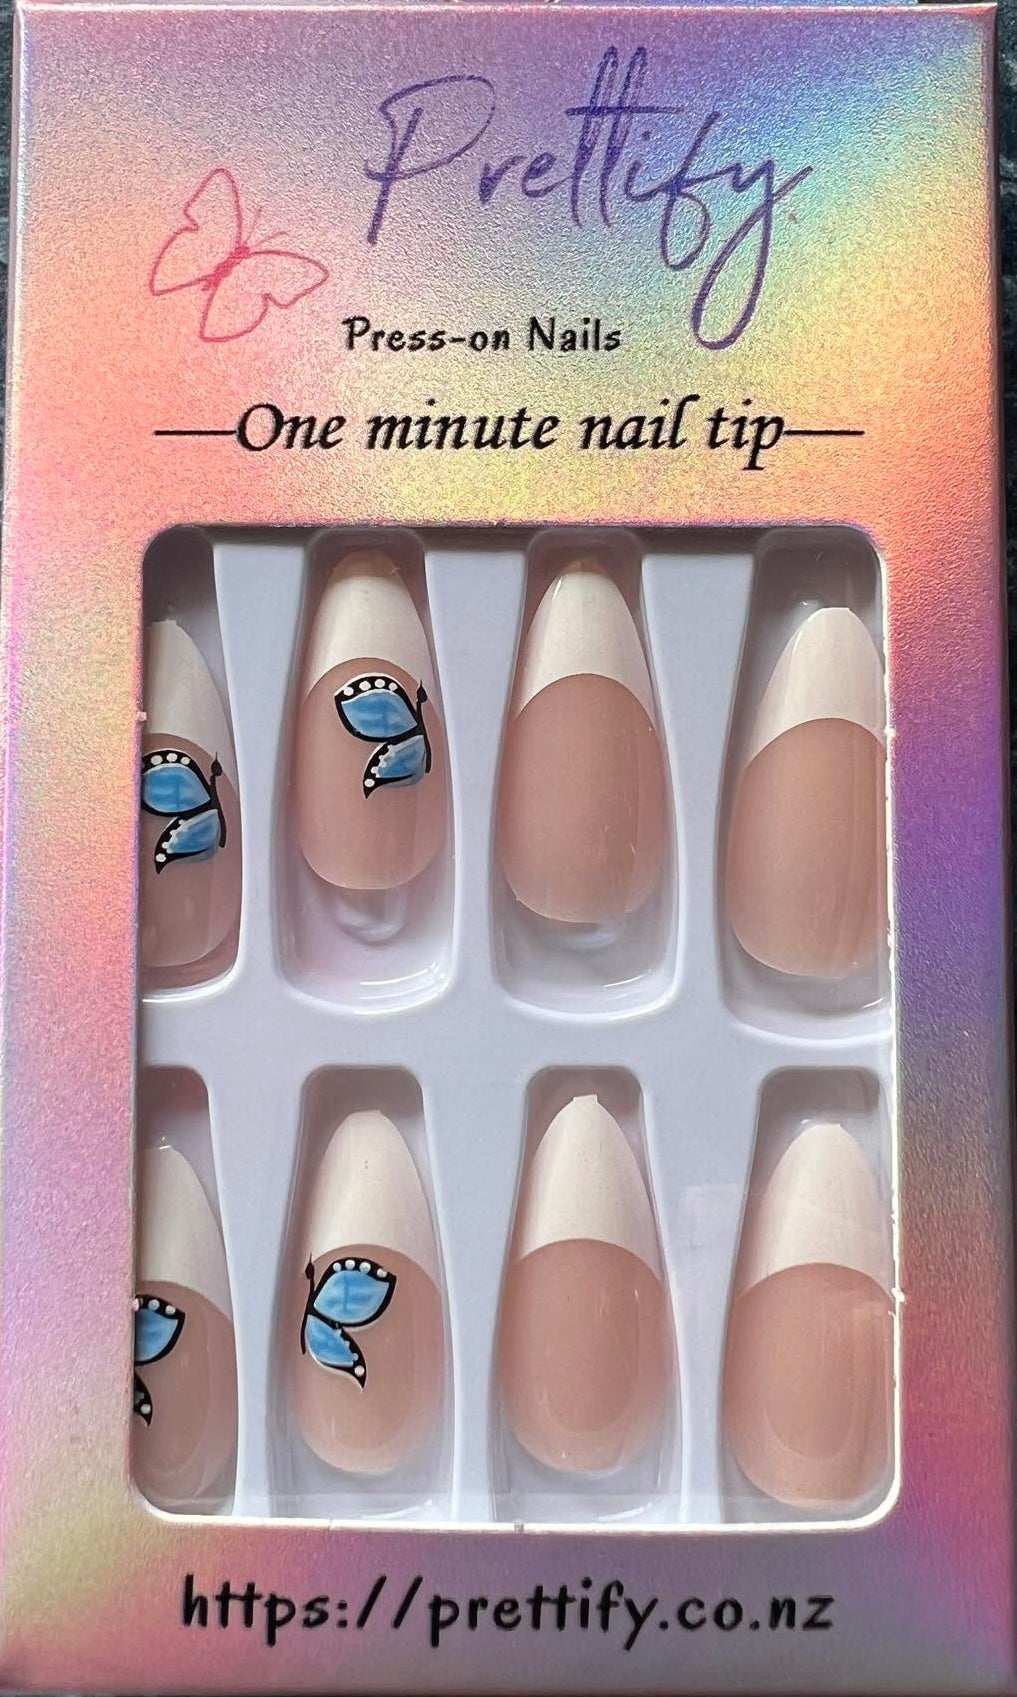 Almond Press on Nails. White tips with Blue Butterflies. Durable Acrylic Press on Nails. Easy and quick to apply. Great for those special occasions, parties or add an edge to any outfit. Gorgeous, flattering and you can re-use them again and again.